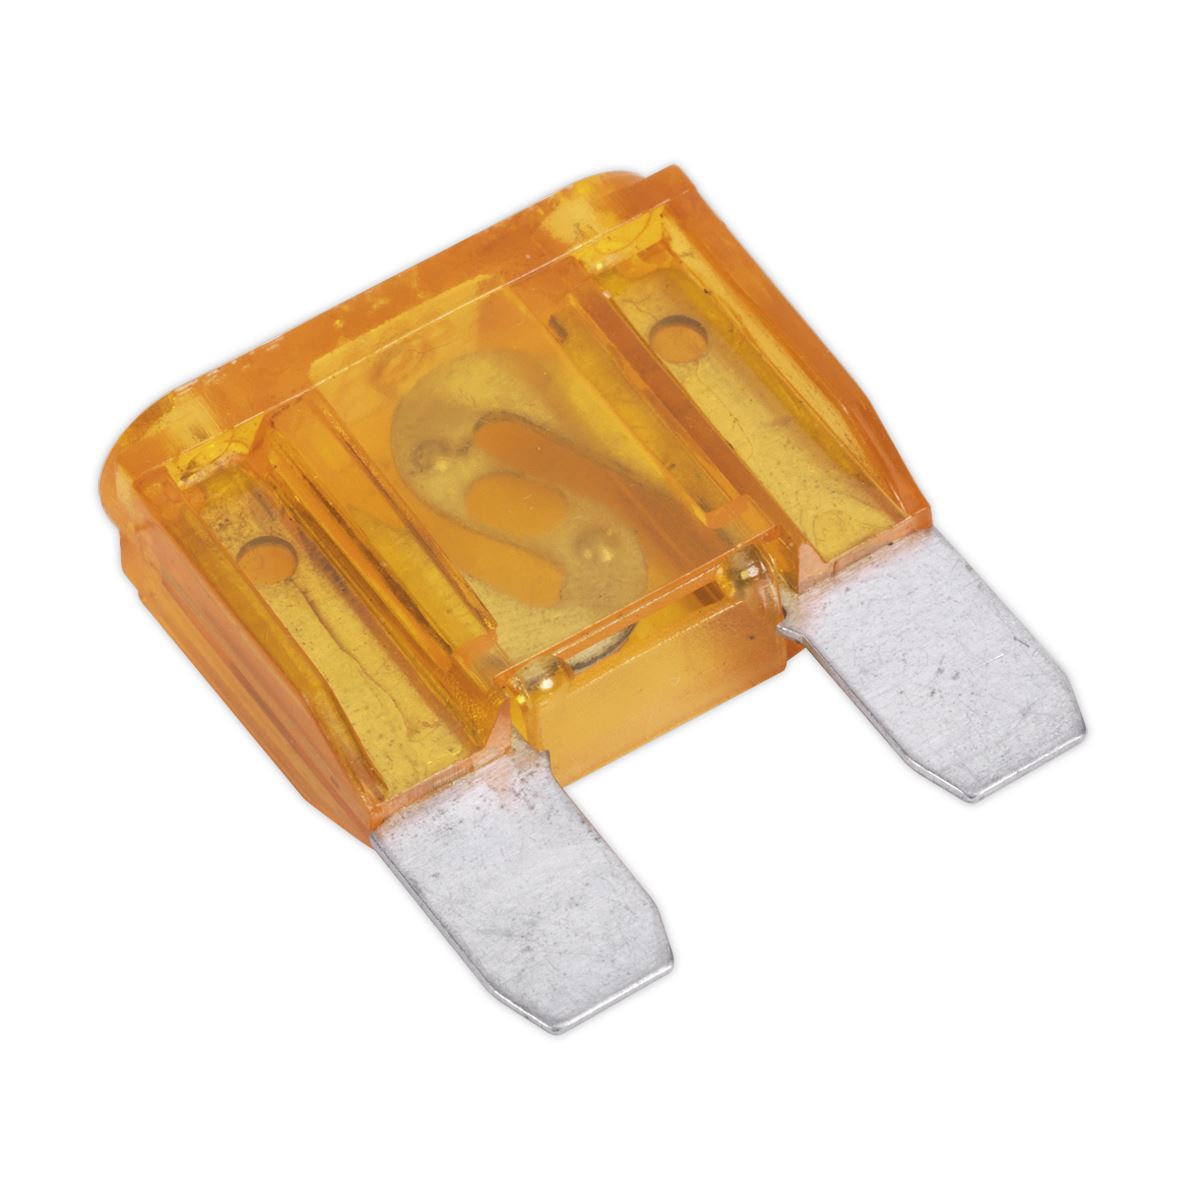 Sealey Automotive MAXI Blade Fuse 40A Pack of 10